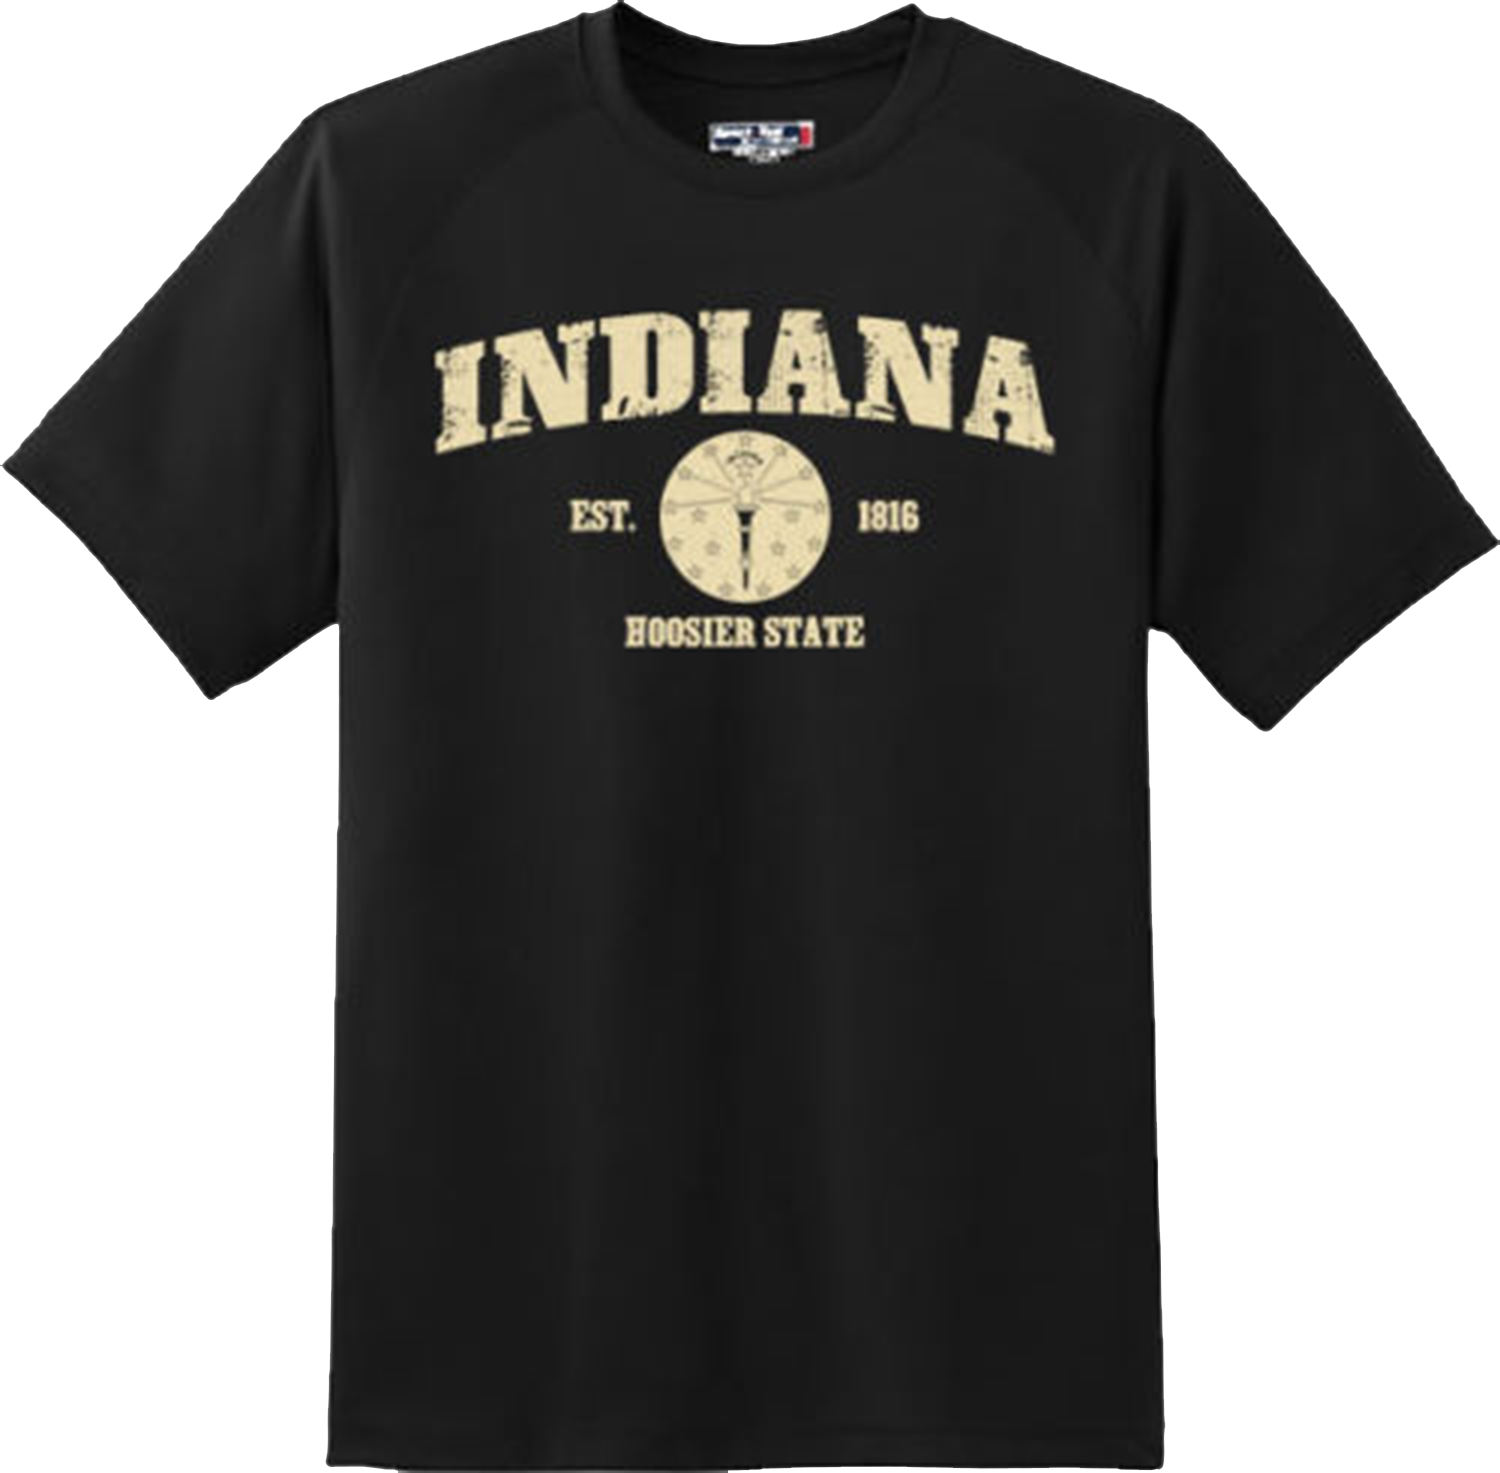 Indiana State Vintage Retro Hometown America Gift T Shirt New Graphic Tee